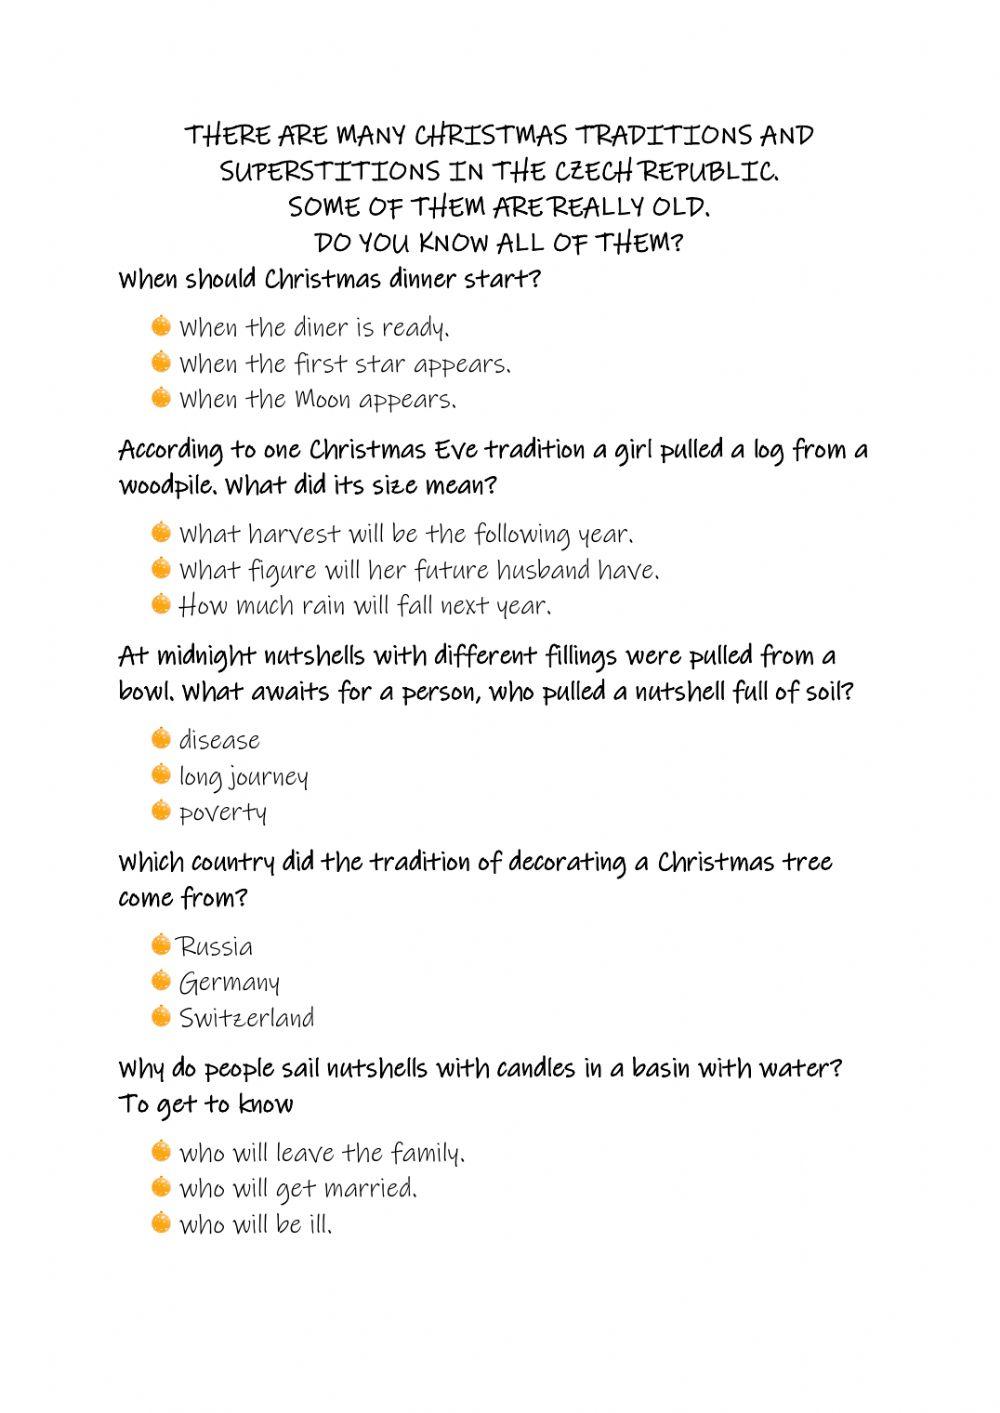 Czech Christmas traditions and superstitions worksheet | Live Worksheets